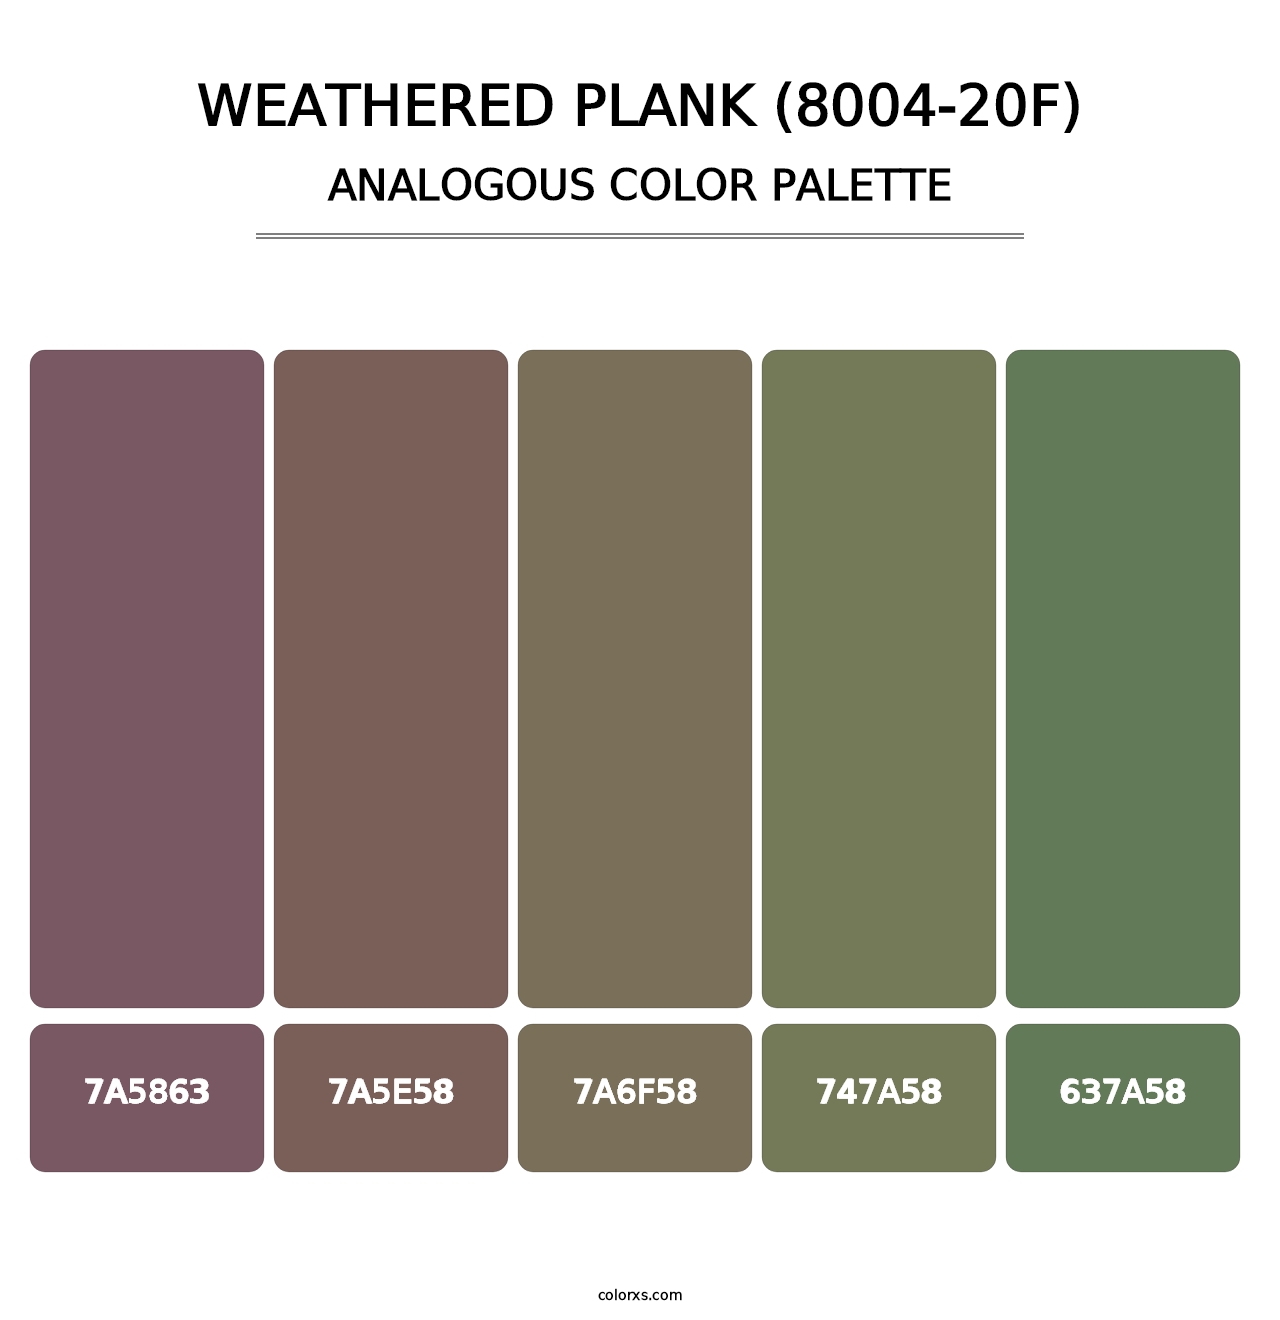 Weathered Plank (8004-20F) - Analogous Color Palette